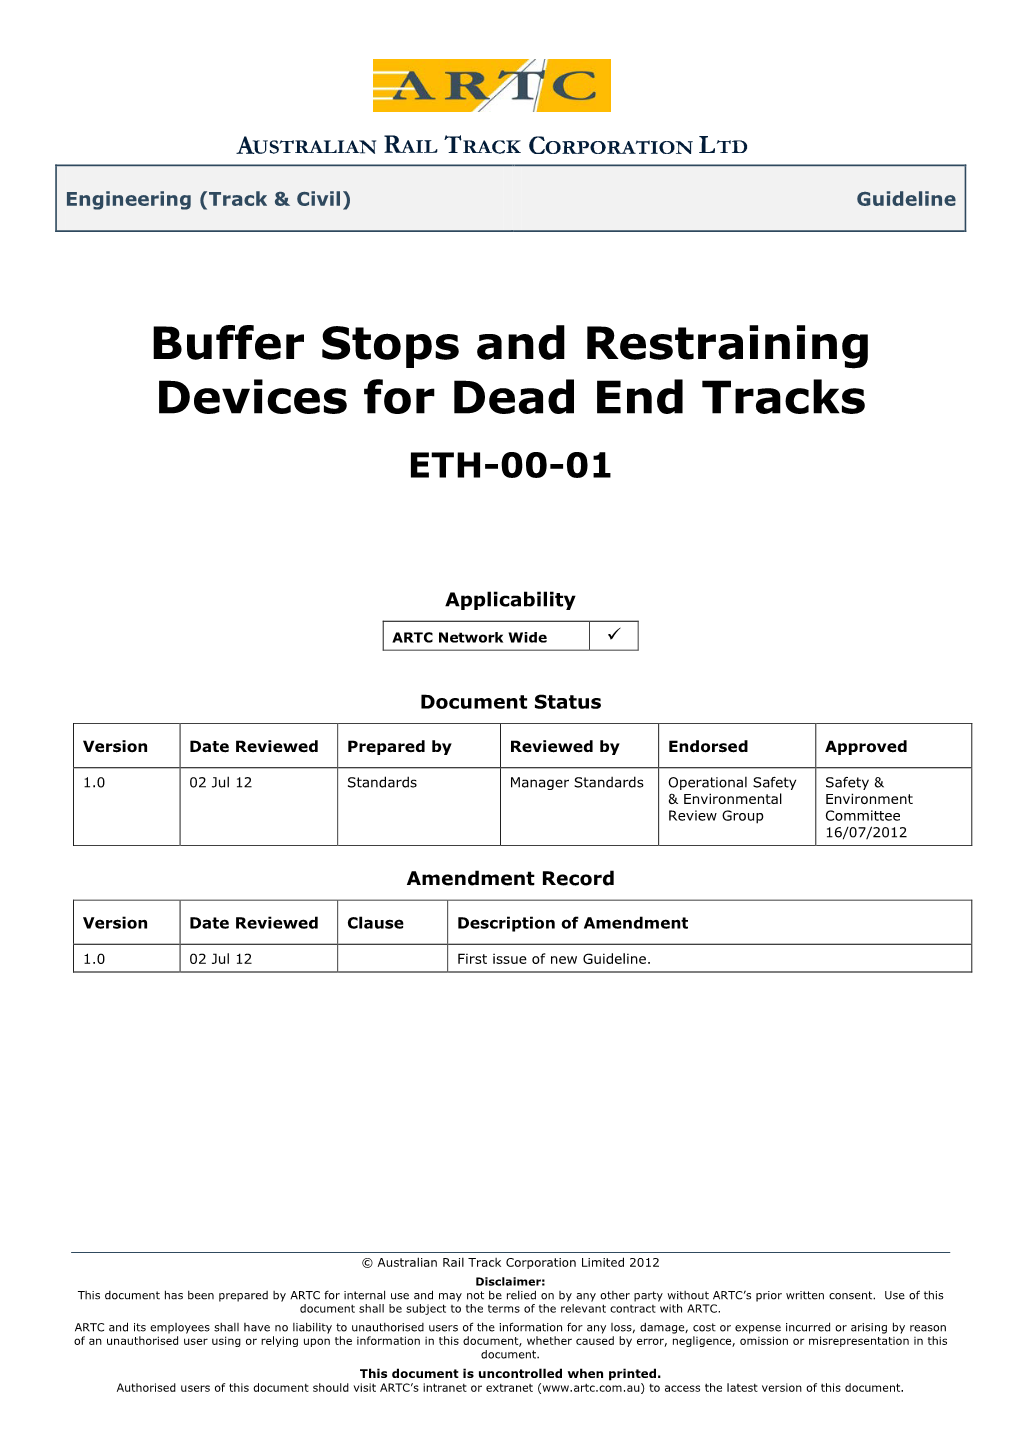 Buffer Stops and Restraining Devices for Dead End Tracks ETH-00-01